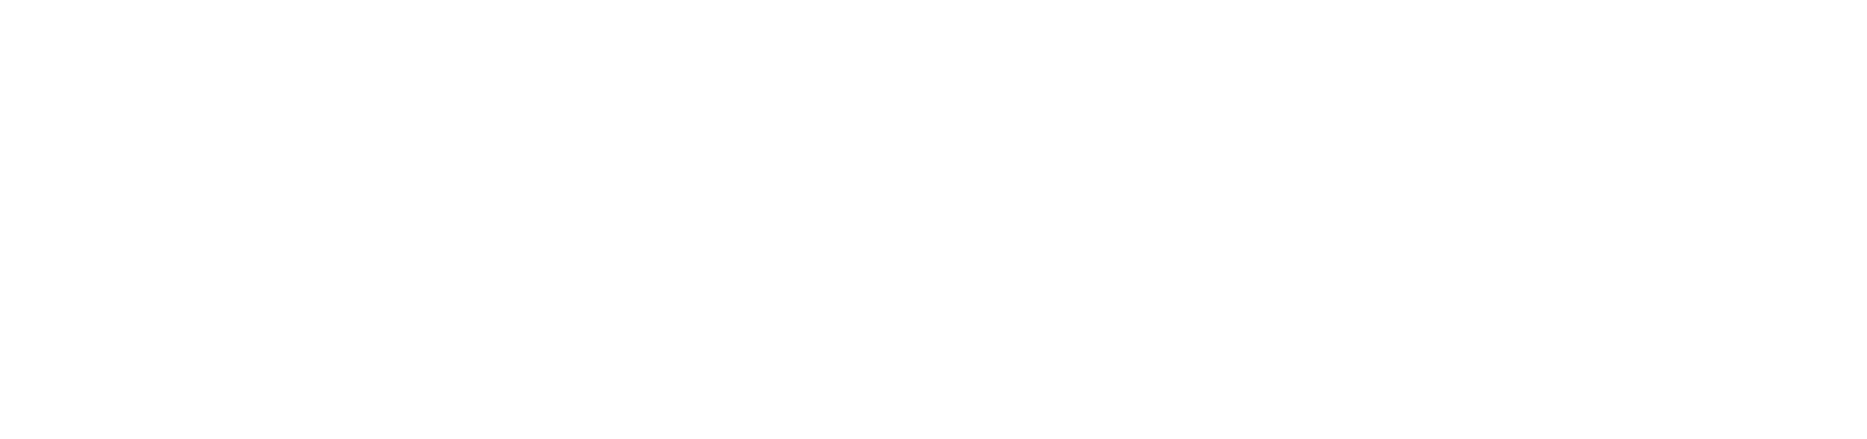 Collective Bargaining Strategy logo